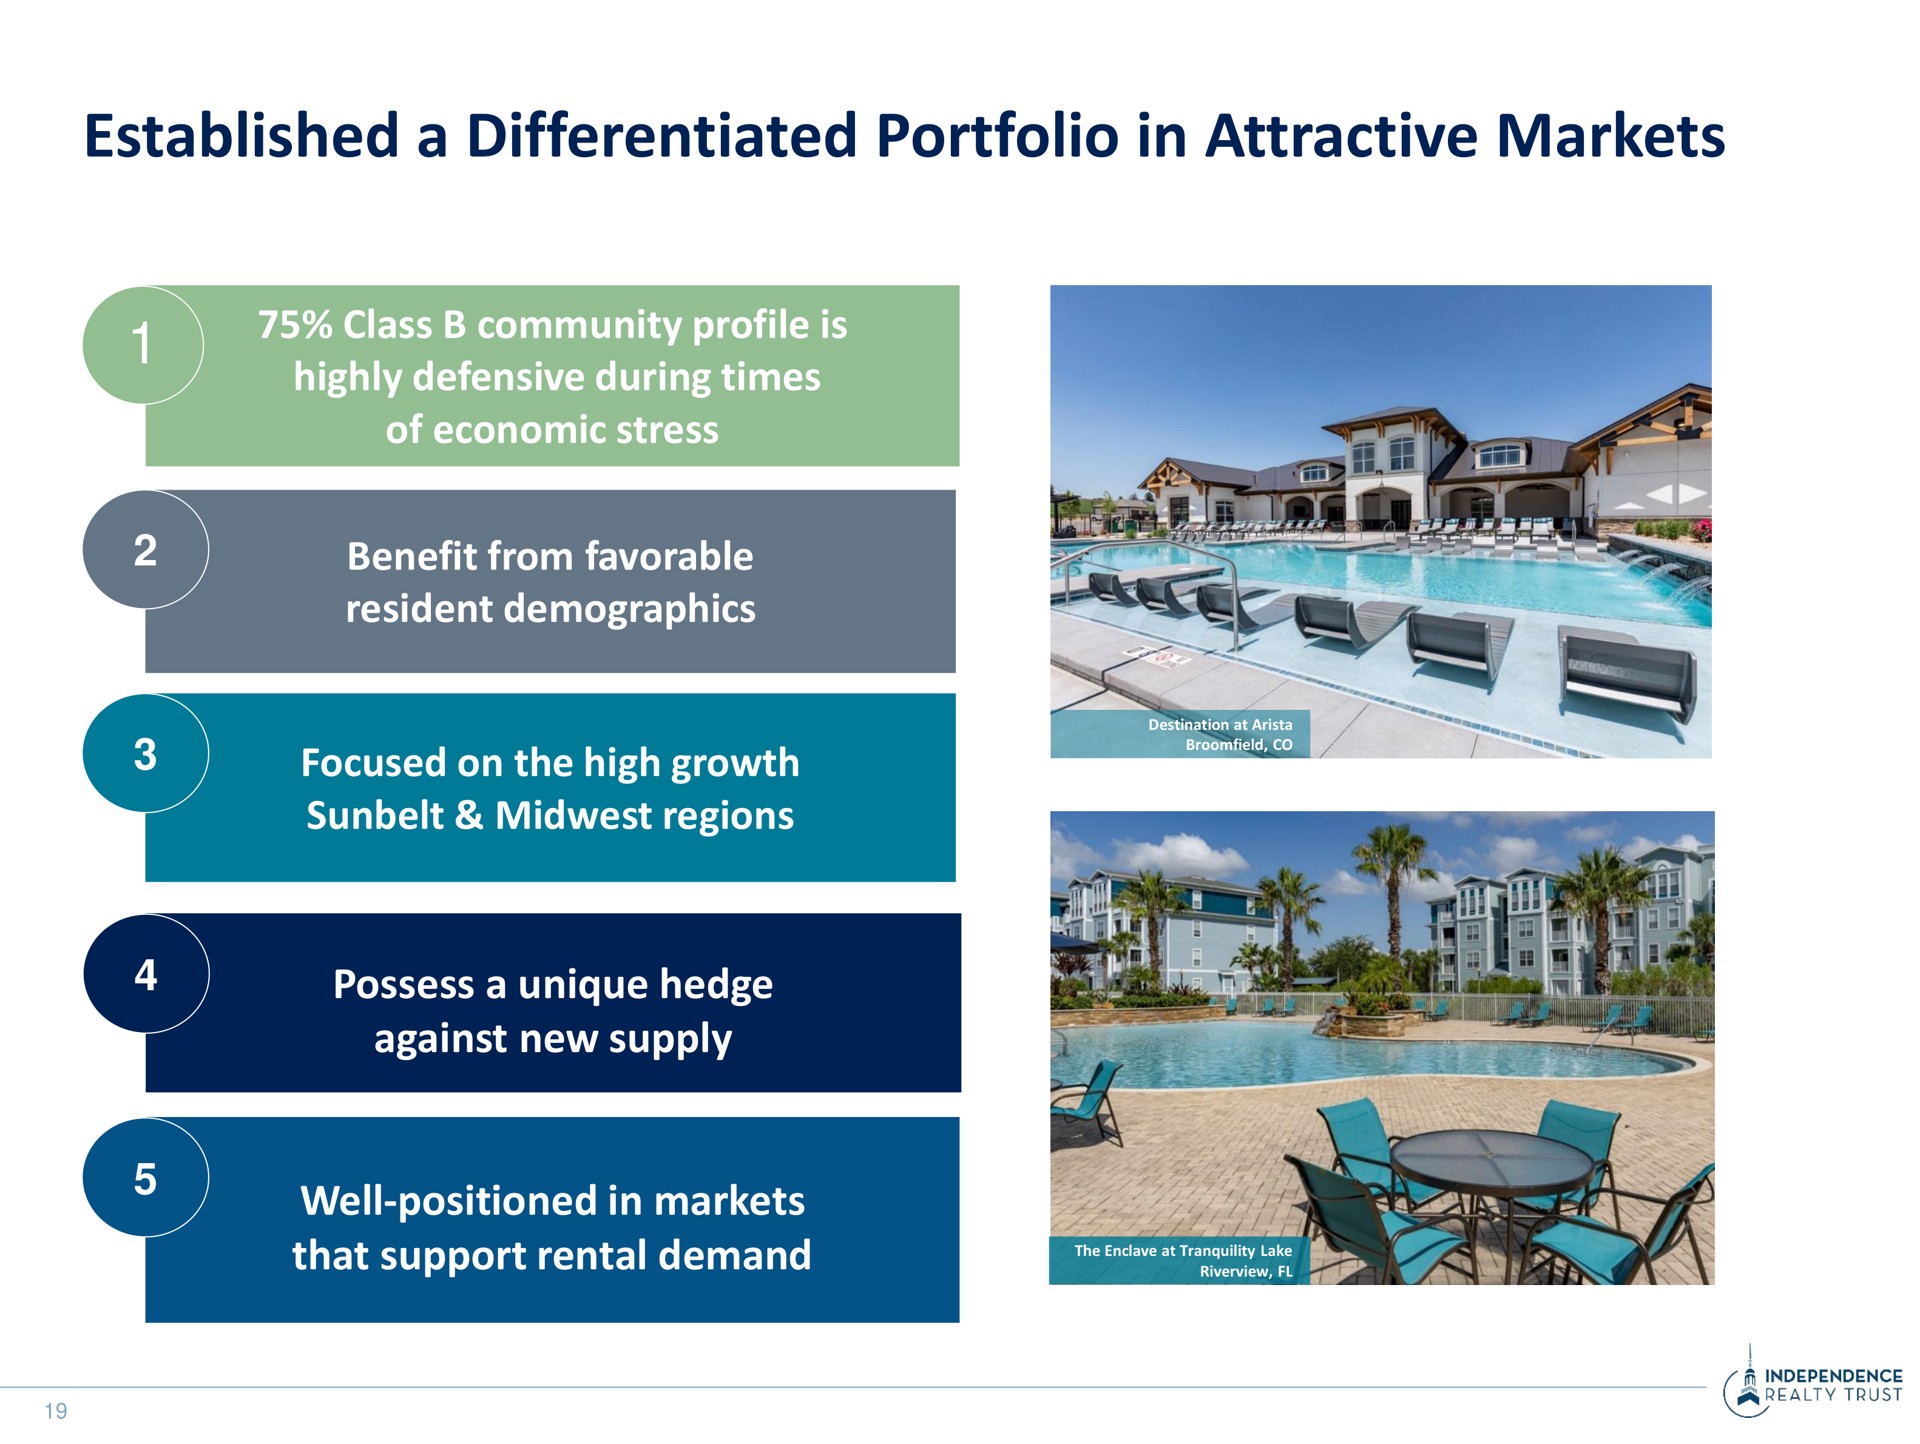 established a differentiated portfolio in attractive markets class community profile is highly defensive during times of economic stress benefit from favorable resident demographics focused on the high growth regions possess a unique hedge against new supply well positioned in markets that support rental demand | Independence Realty Trust